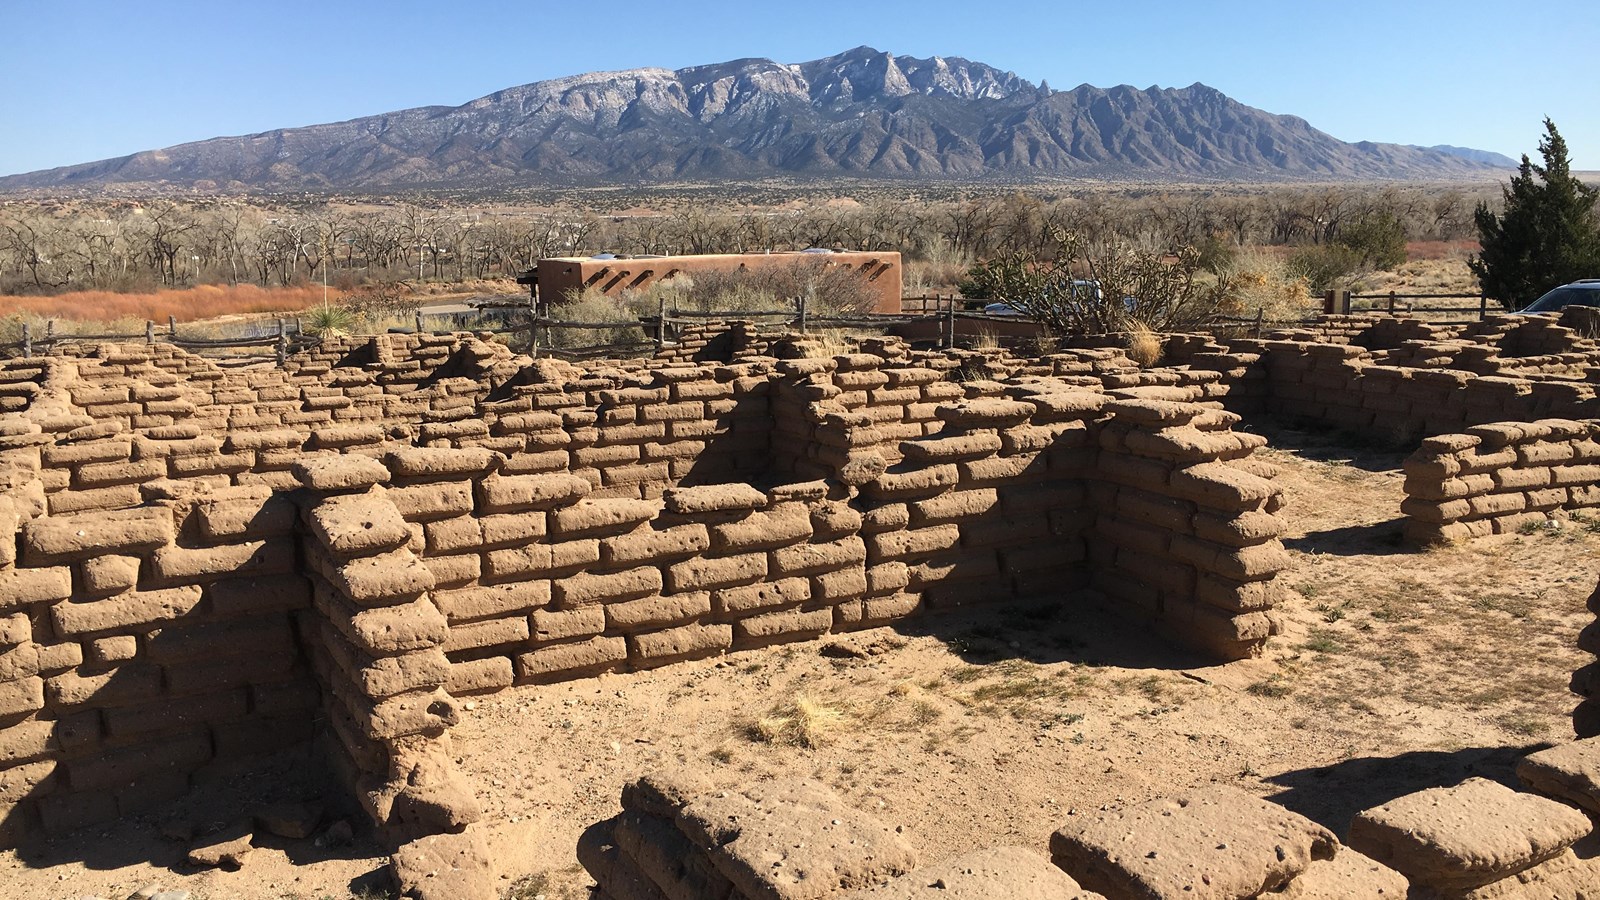 Adobe ruins sit in front of distant snow-dusted desert peaks.